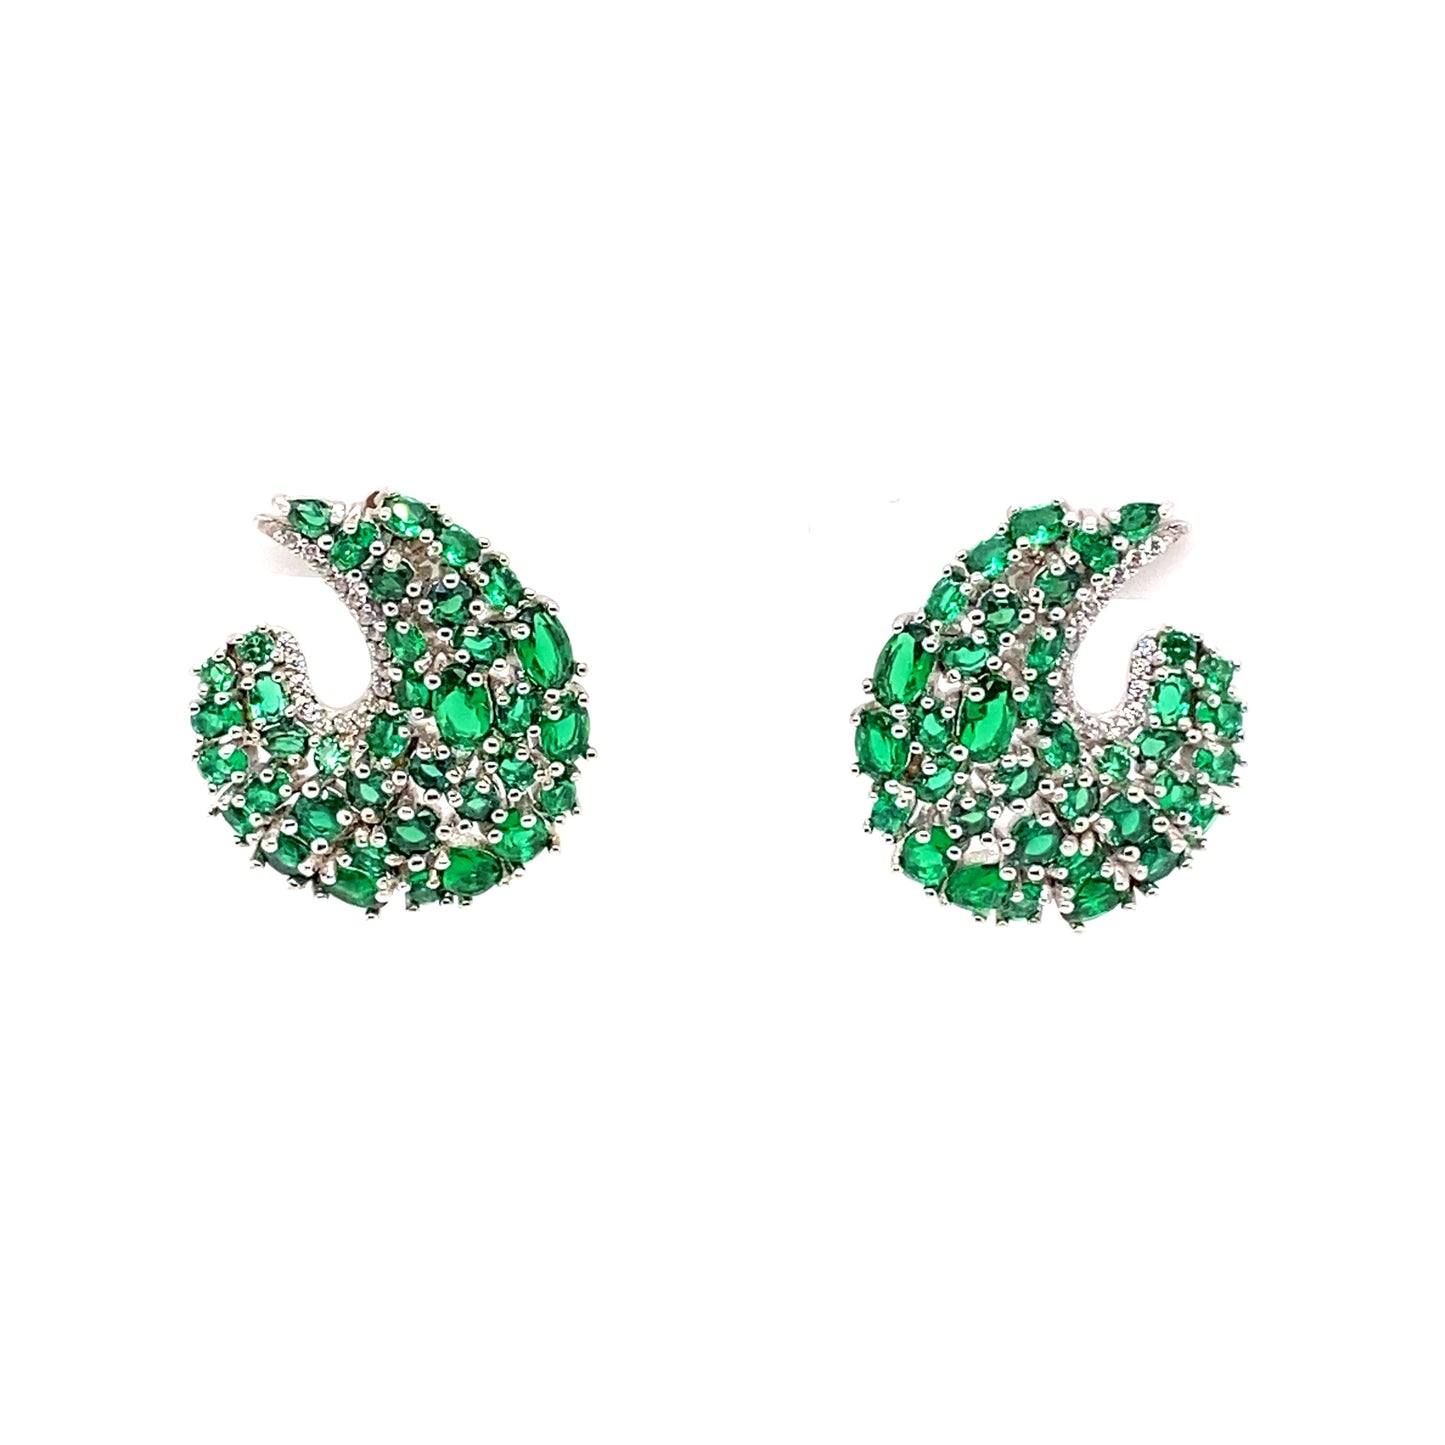 Magnificent Small J Hoop Earrings